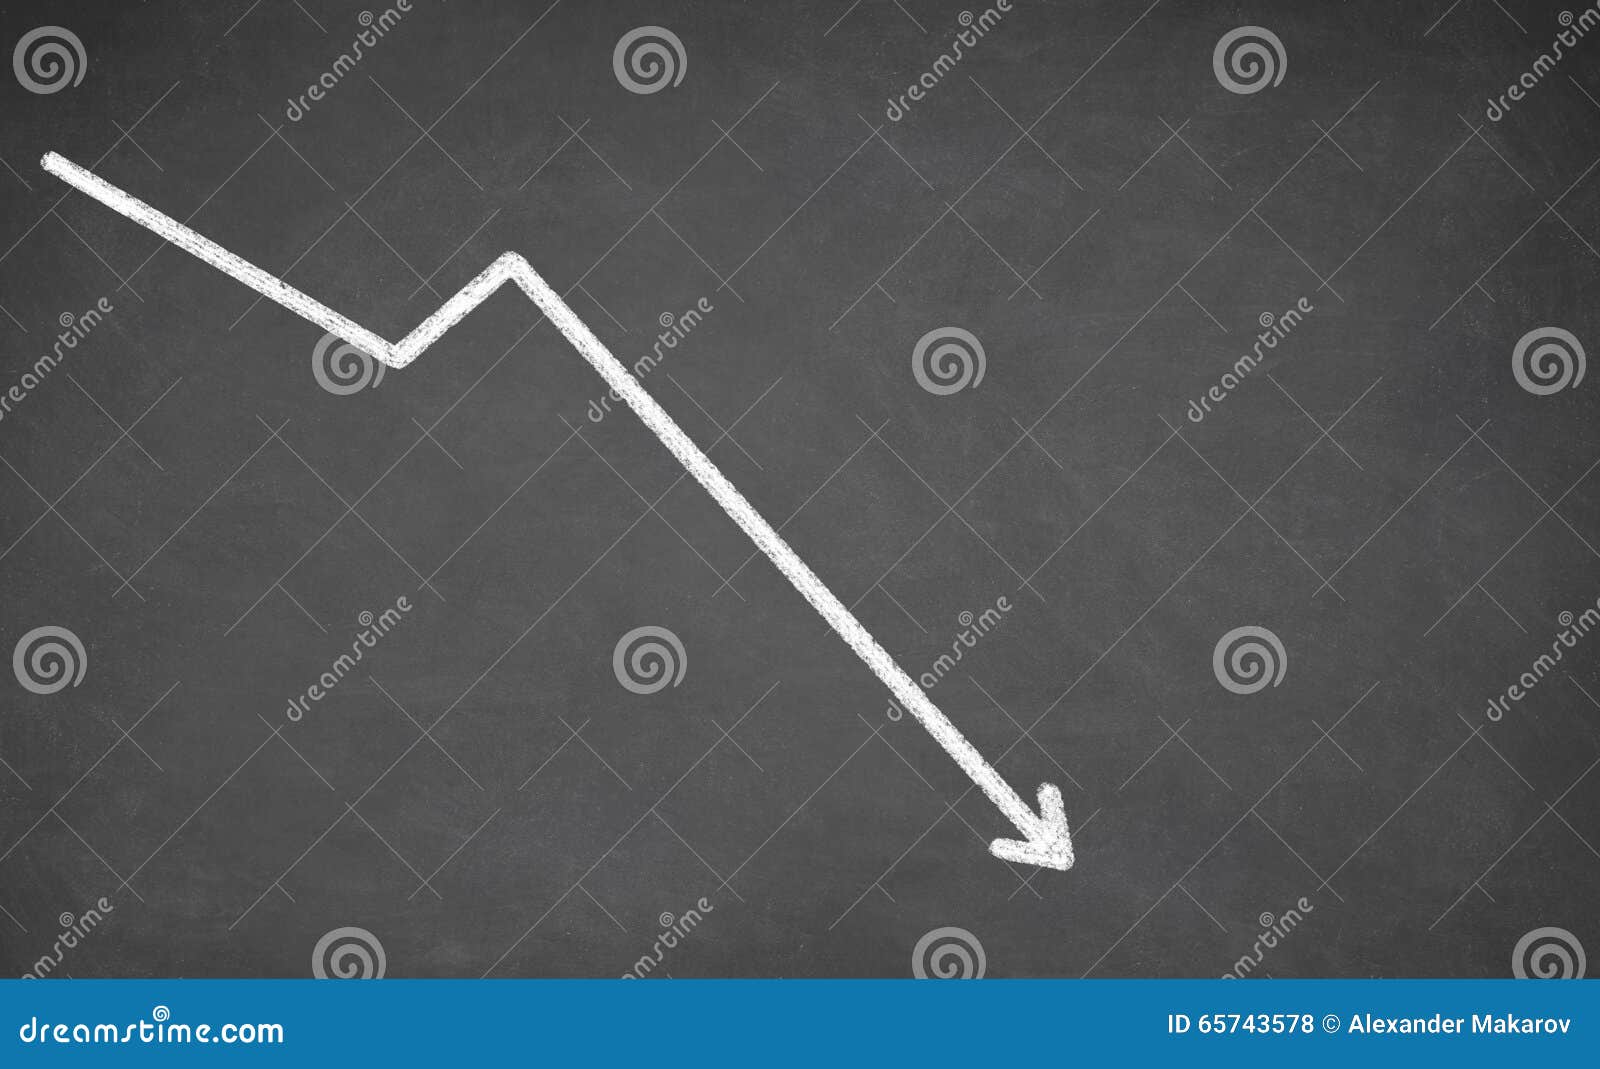 line graph showing a downward trend